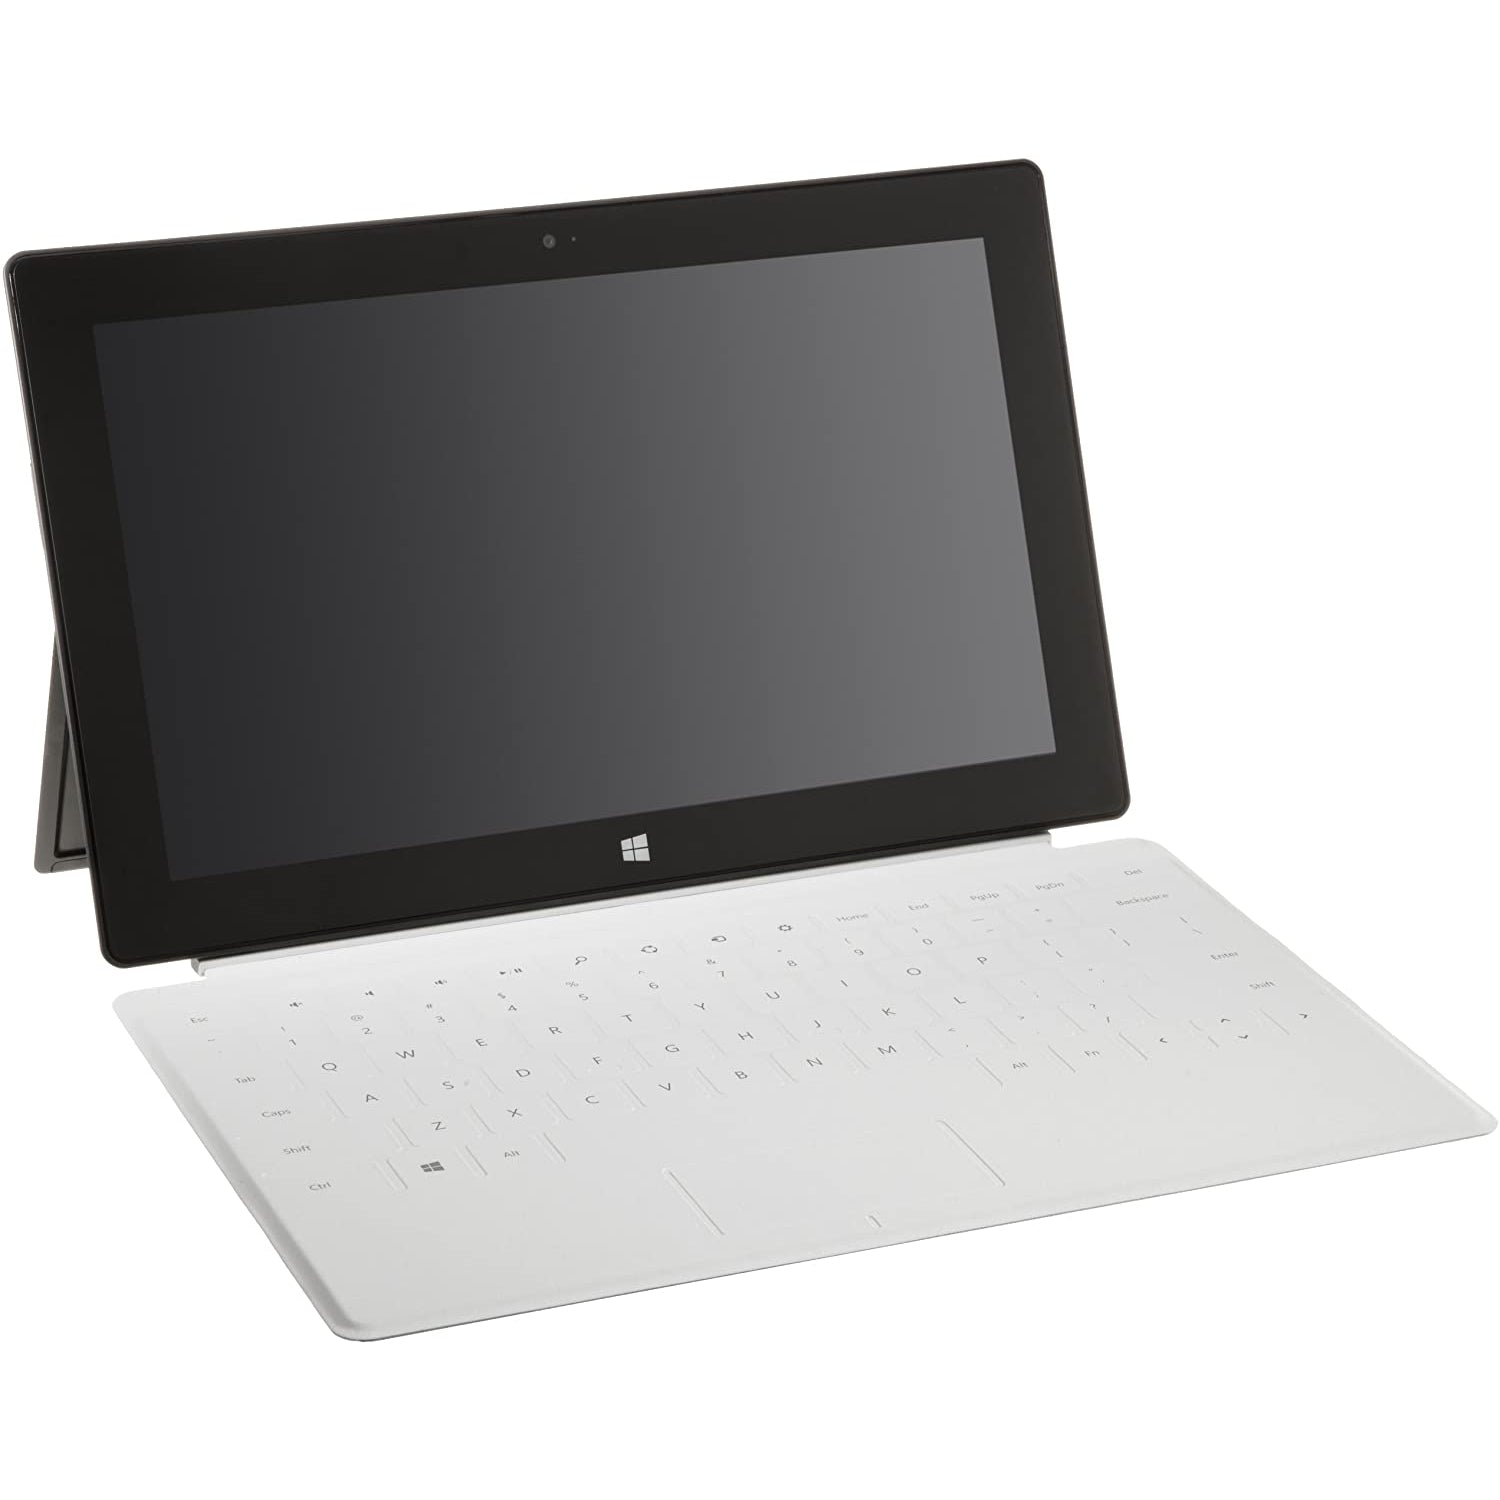 Microsoft Surface Touch Cover for Microsoft Surface - White - Refurbished Good